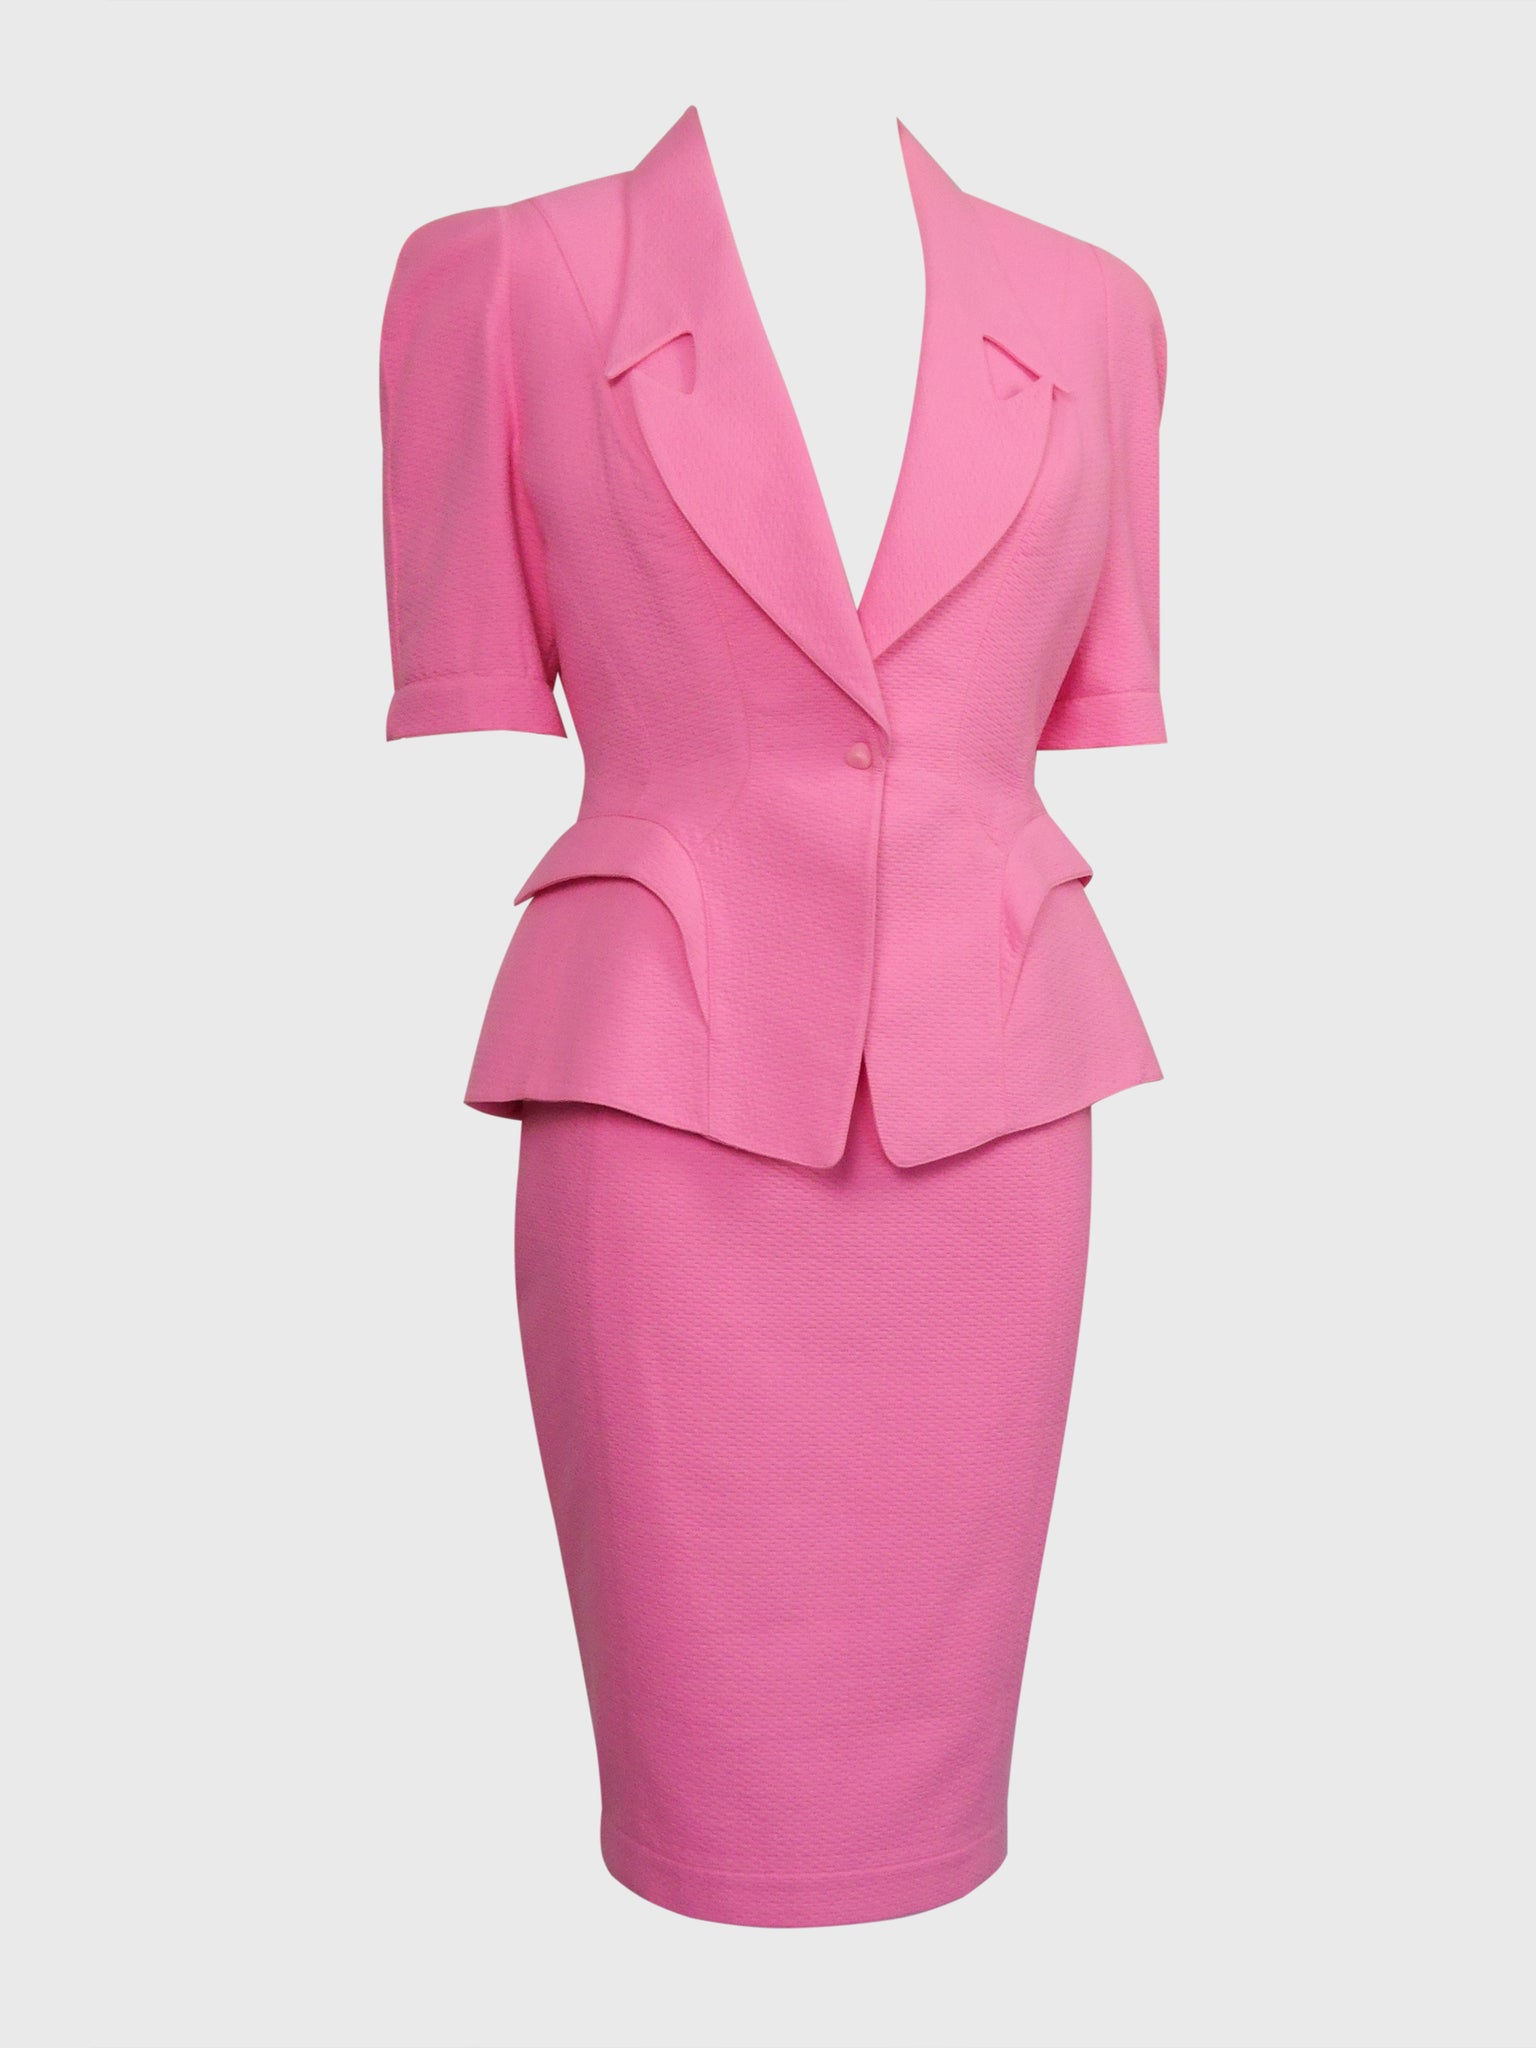 THIERRY MUGLER 1980s 1990s Vintage Pink Barbiecore Jacket & Skirt Suit Size S